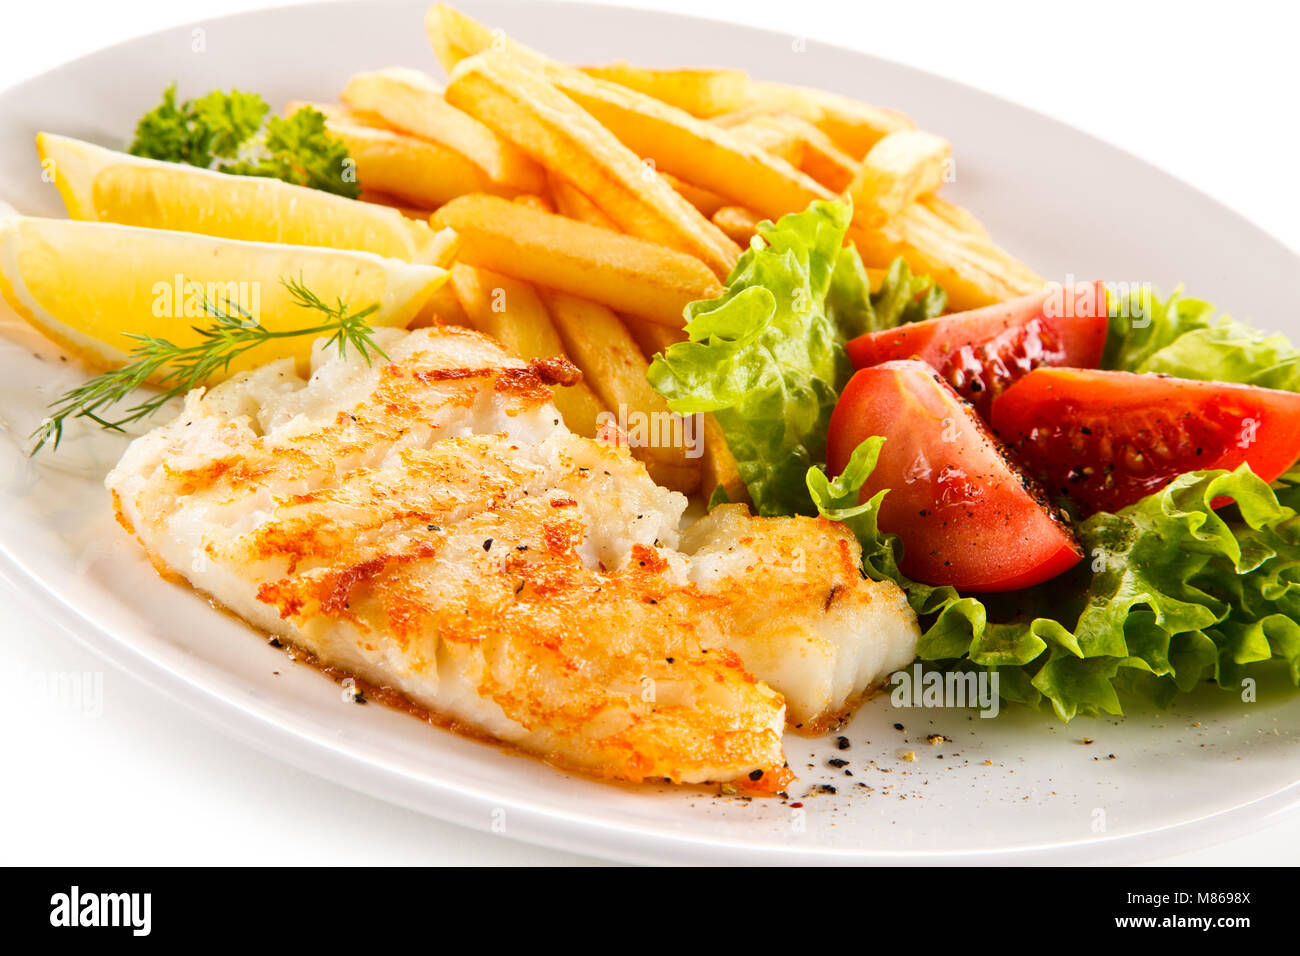 Fried fish fillet with french fries on white background Stock Photo